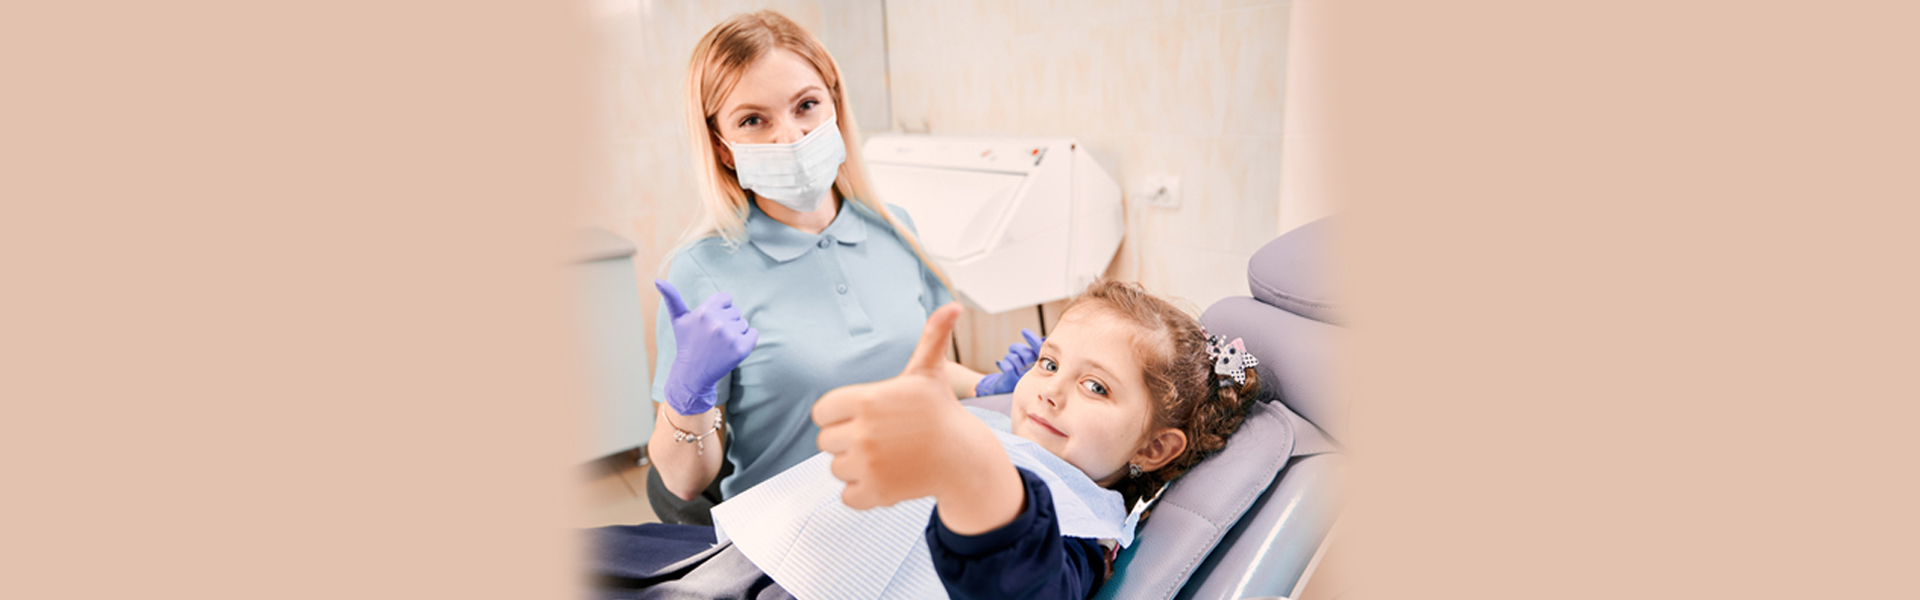 Embracing Every Smile: The Significance of Pediatric Dentistry for Special Needs Children